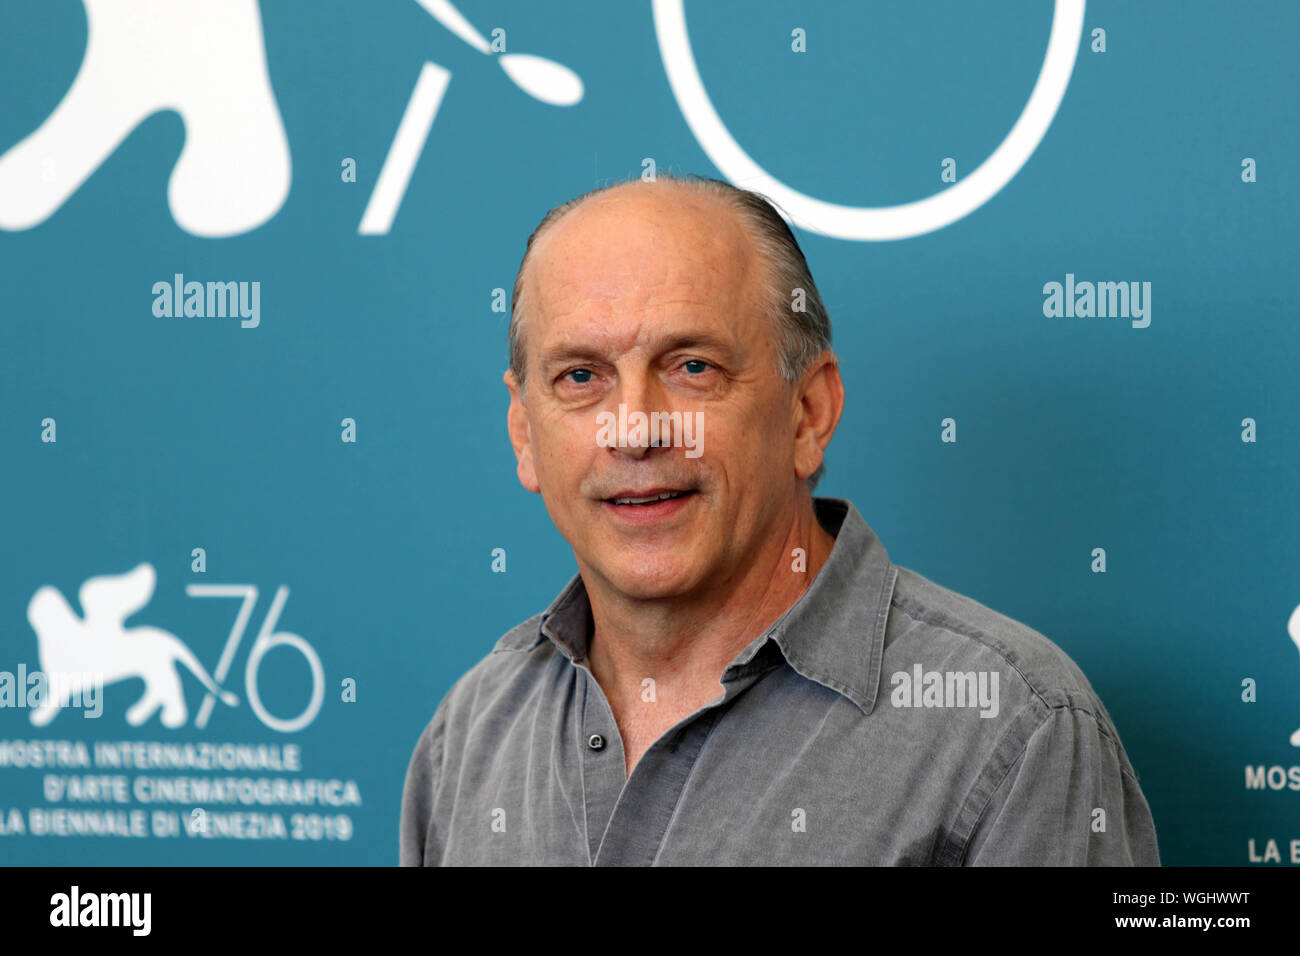 Italy, Lido di Venezia, September 1, 2019 : The actor Tomas Arana at the photocall of  'The New Pope' (Episodes 2 and 7), director Paolo Sorrentino. 7 Stock Photo